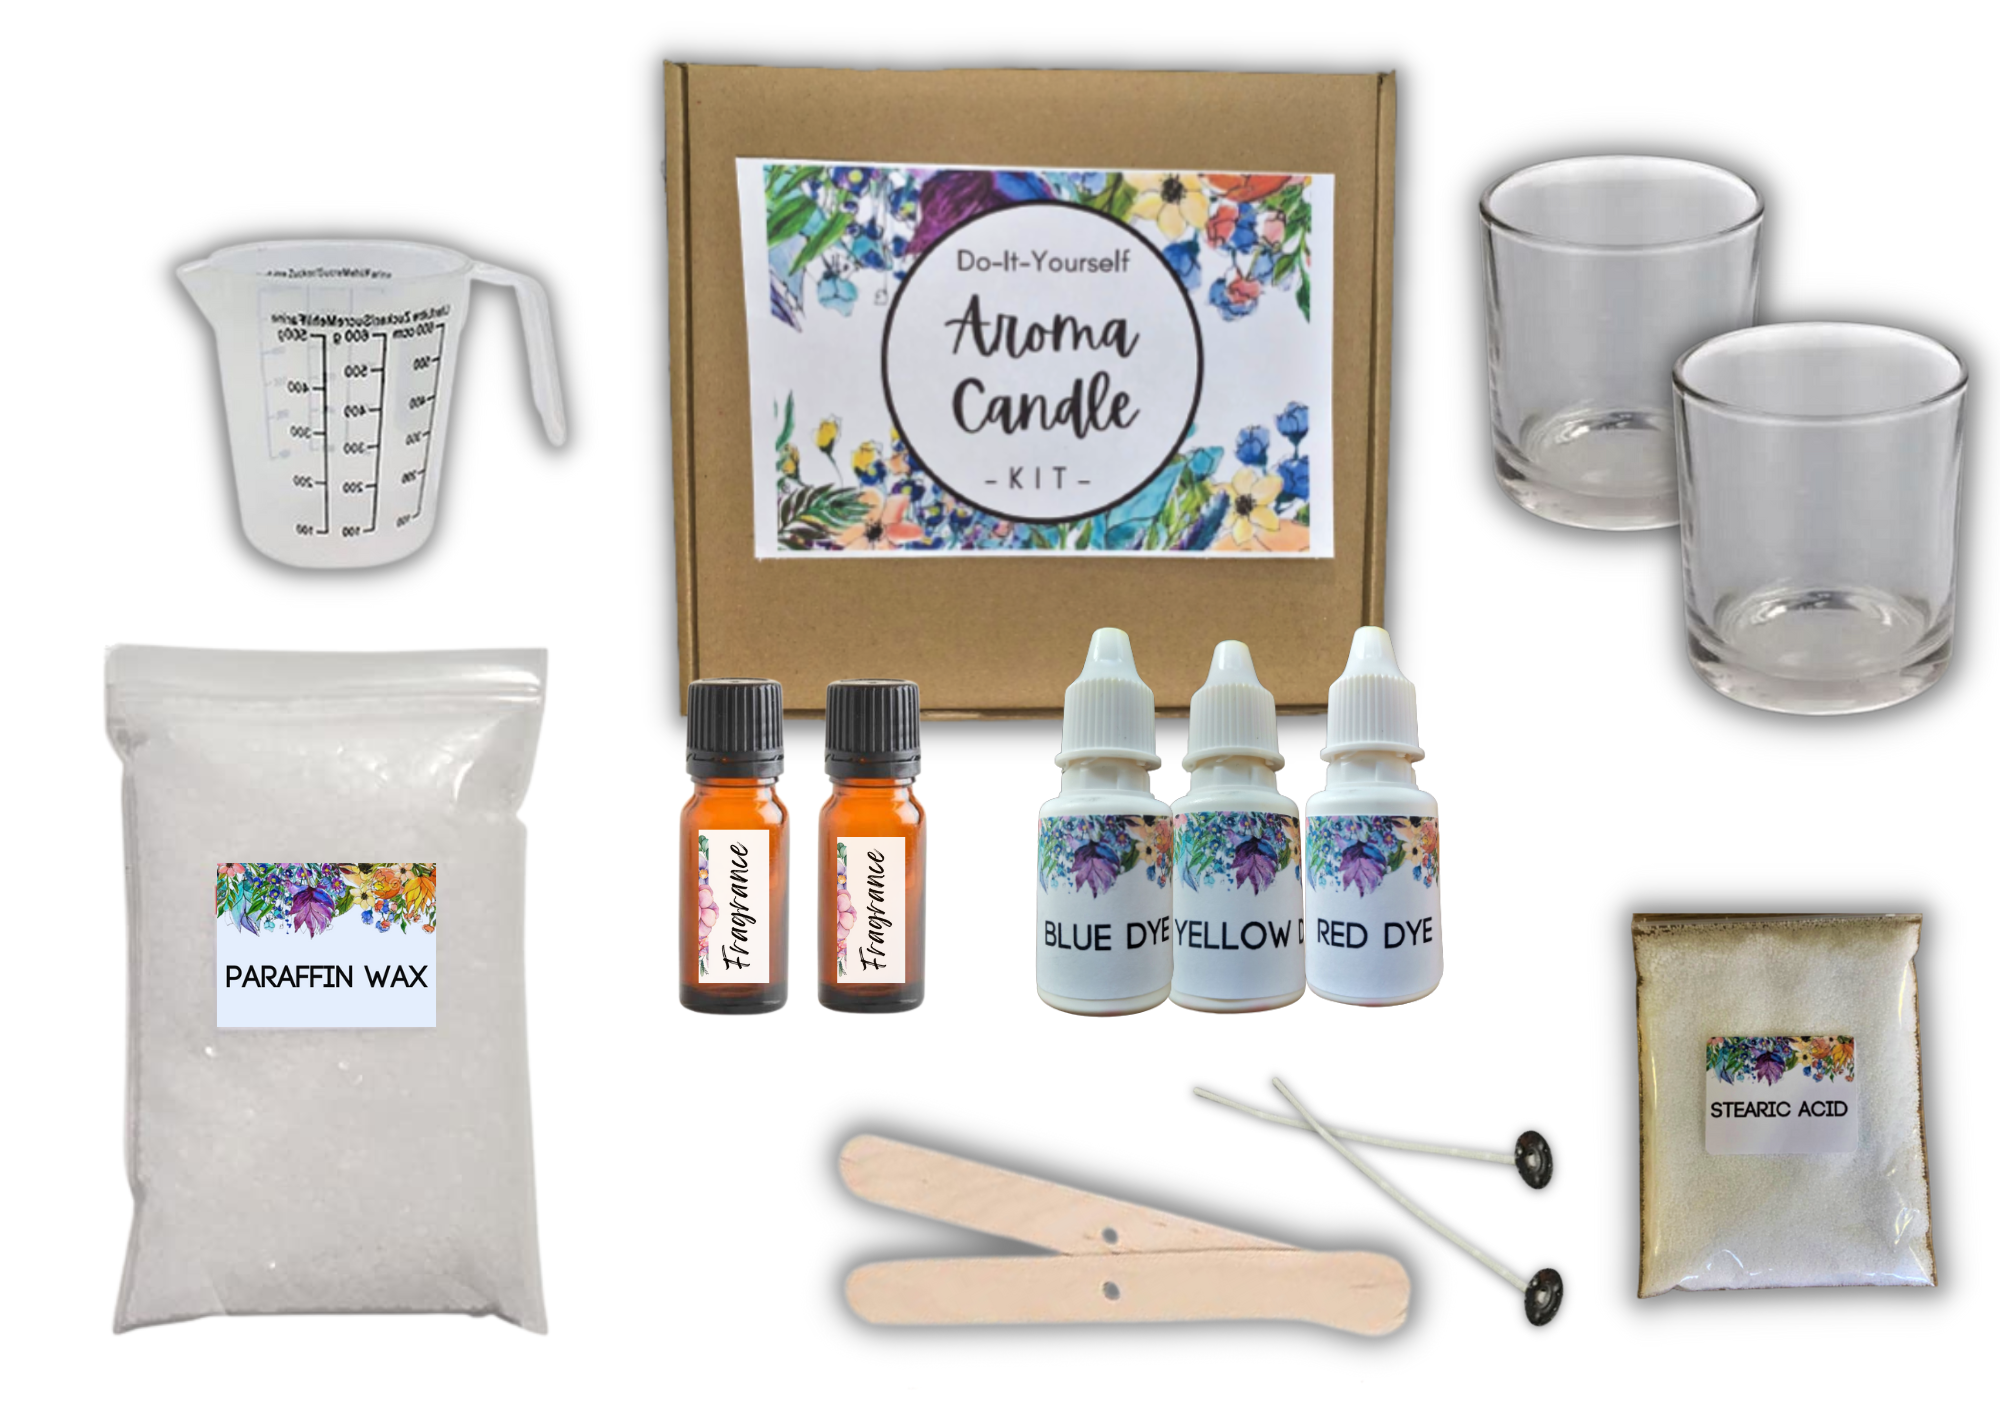  Complete Candle Making Kit for Beginners, Includes 5 Colors  Candle Wax, 7 Candle Molds, 10 Wicks, 1 Melting Cup, and Guide book